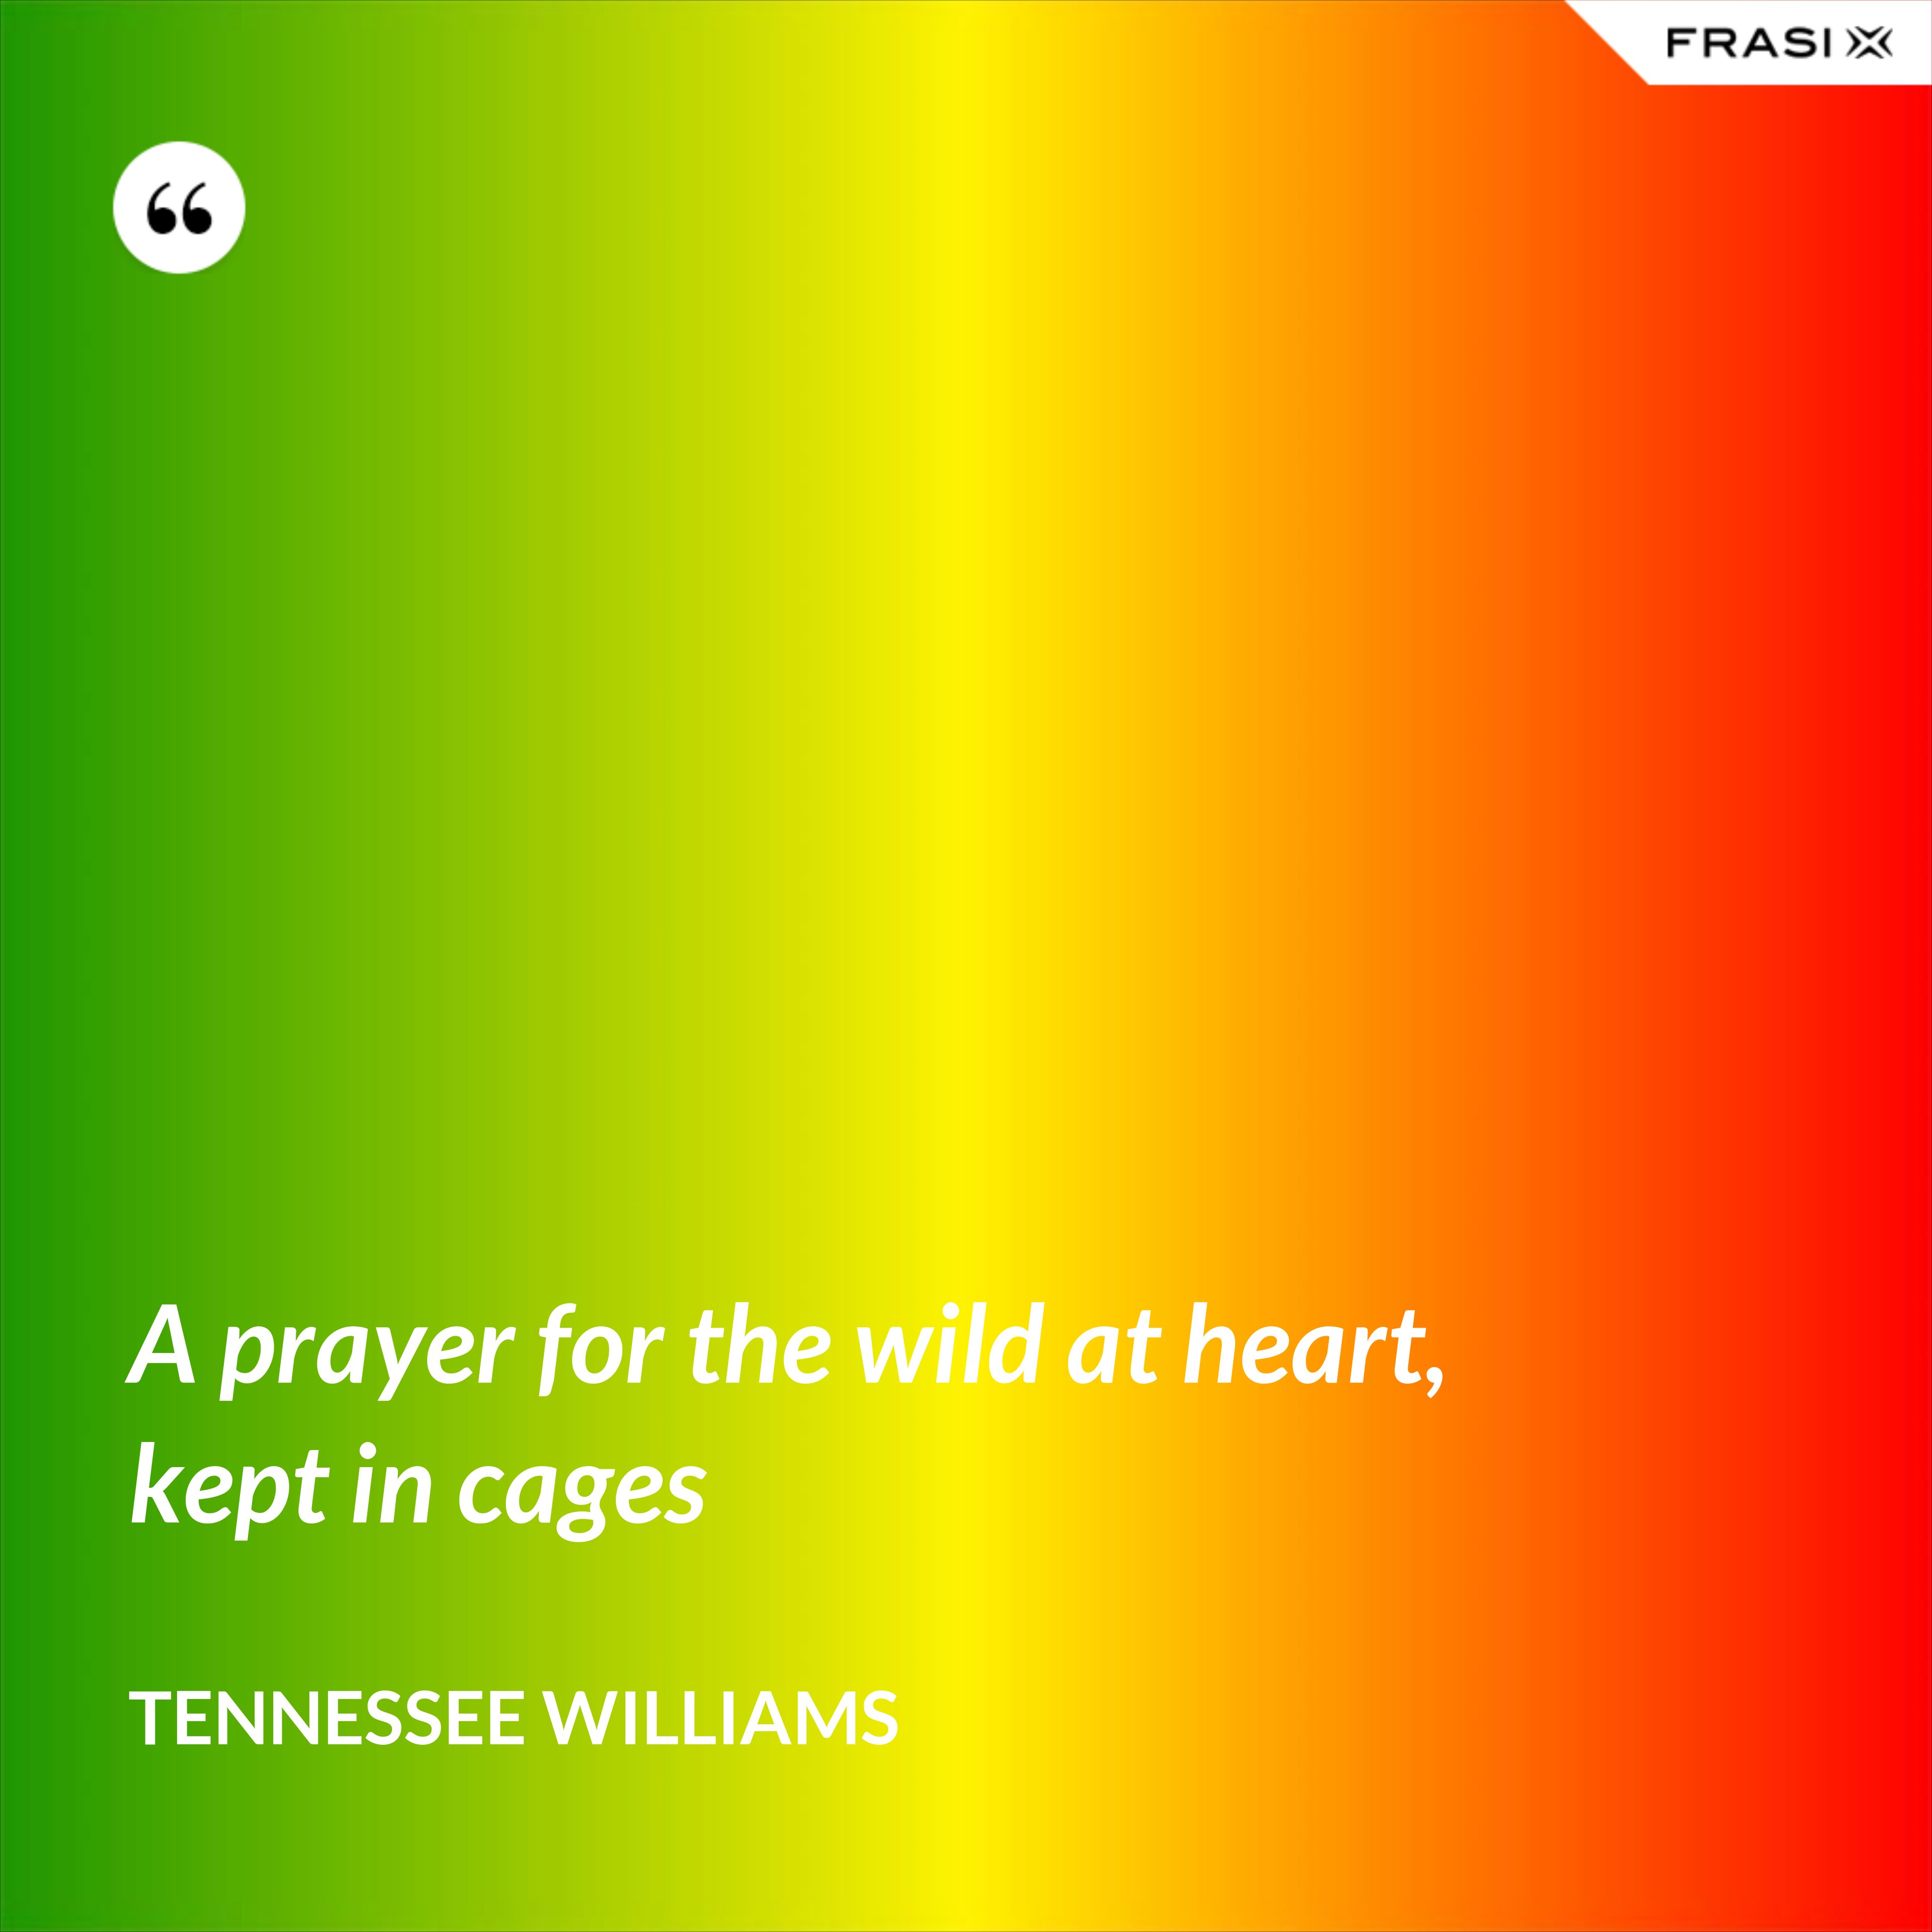 A prayer for the wild at heart, kept in cages - Tennessee Williams